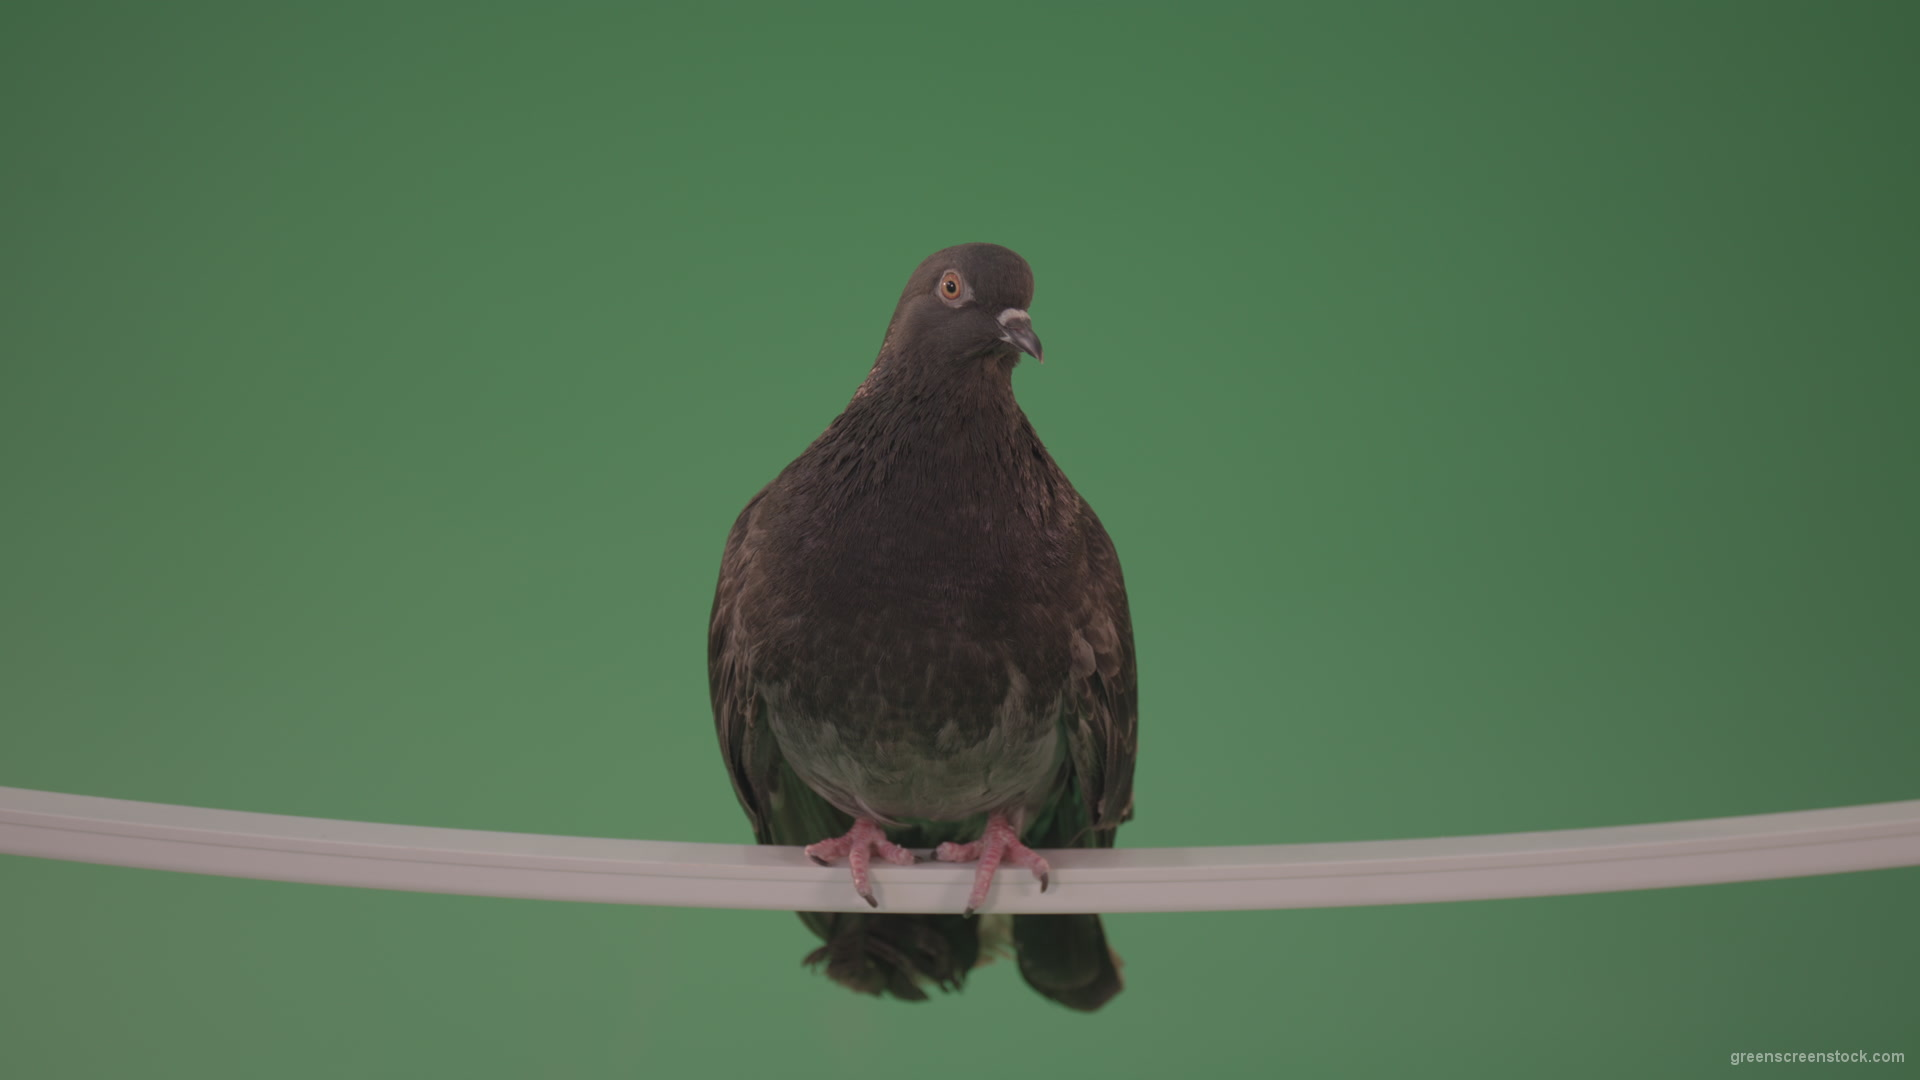 Gray-wild-bird-doves-sitting-on-a-branch-in-the-city-isolated-in-green-screen-studio_001 Green Screen Stock